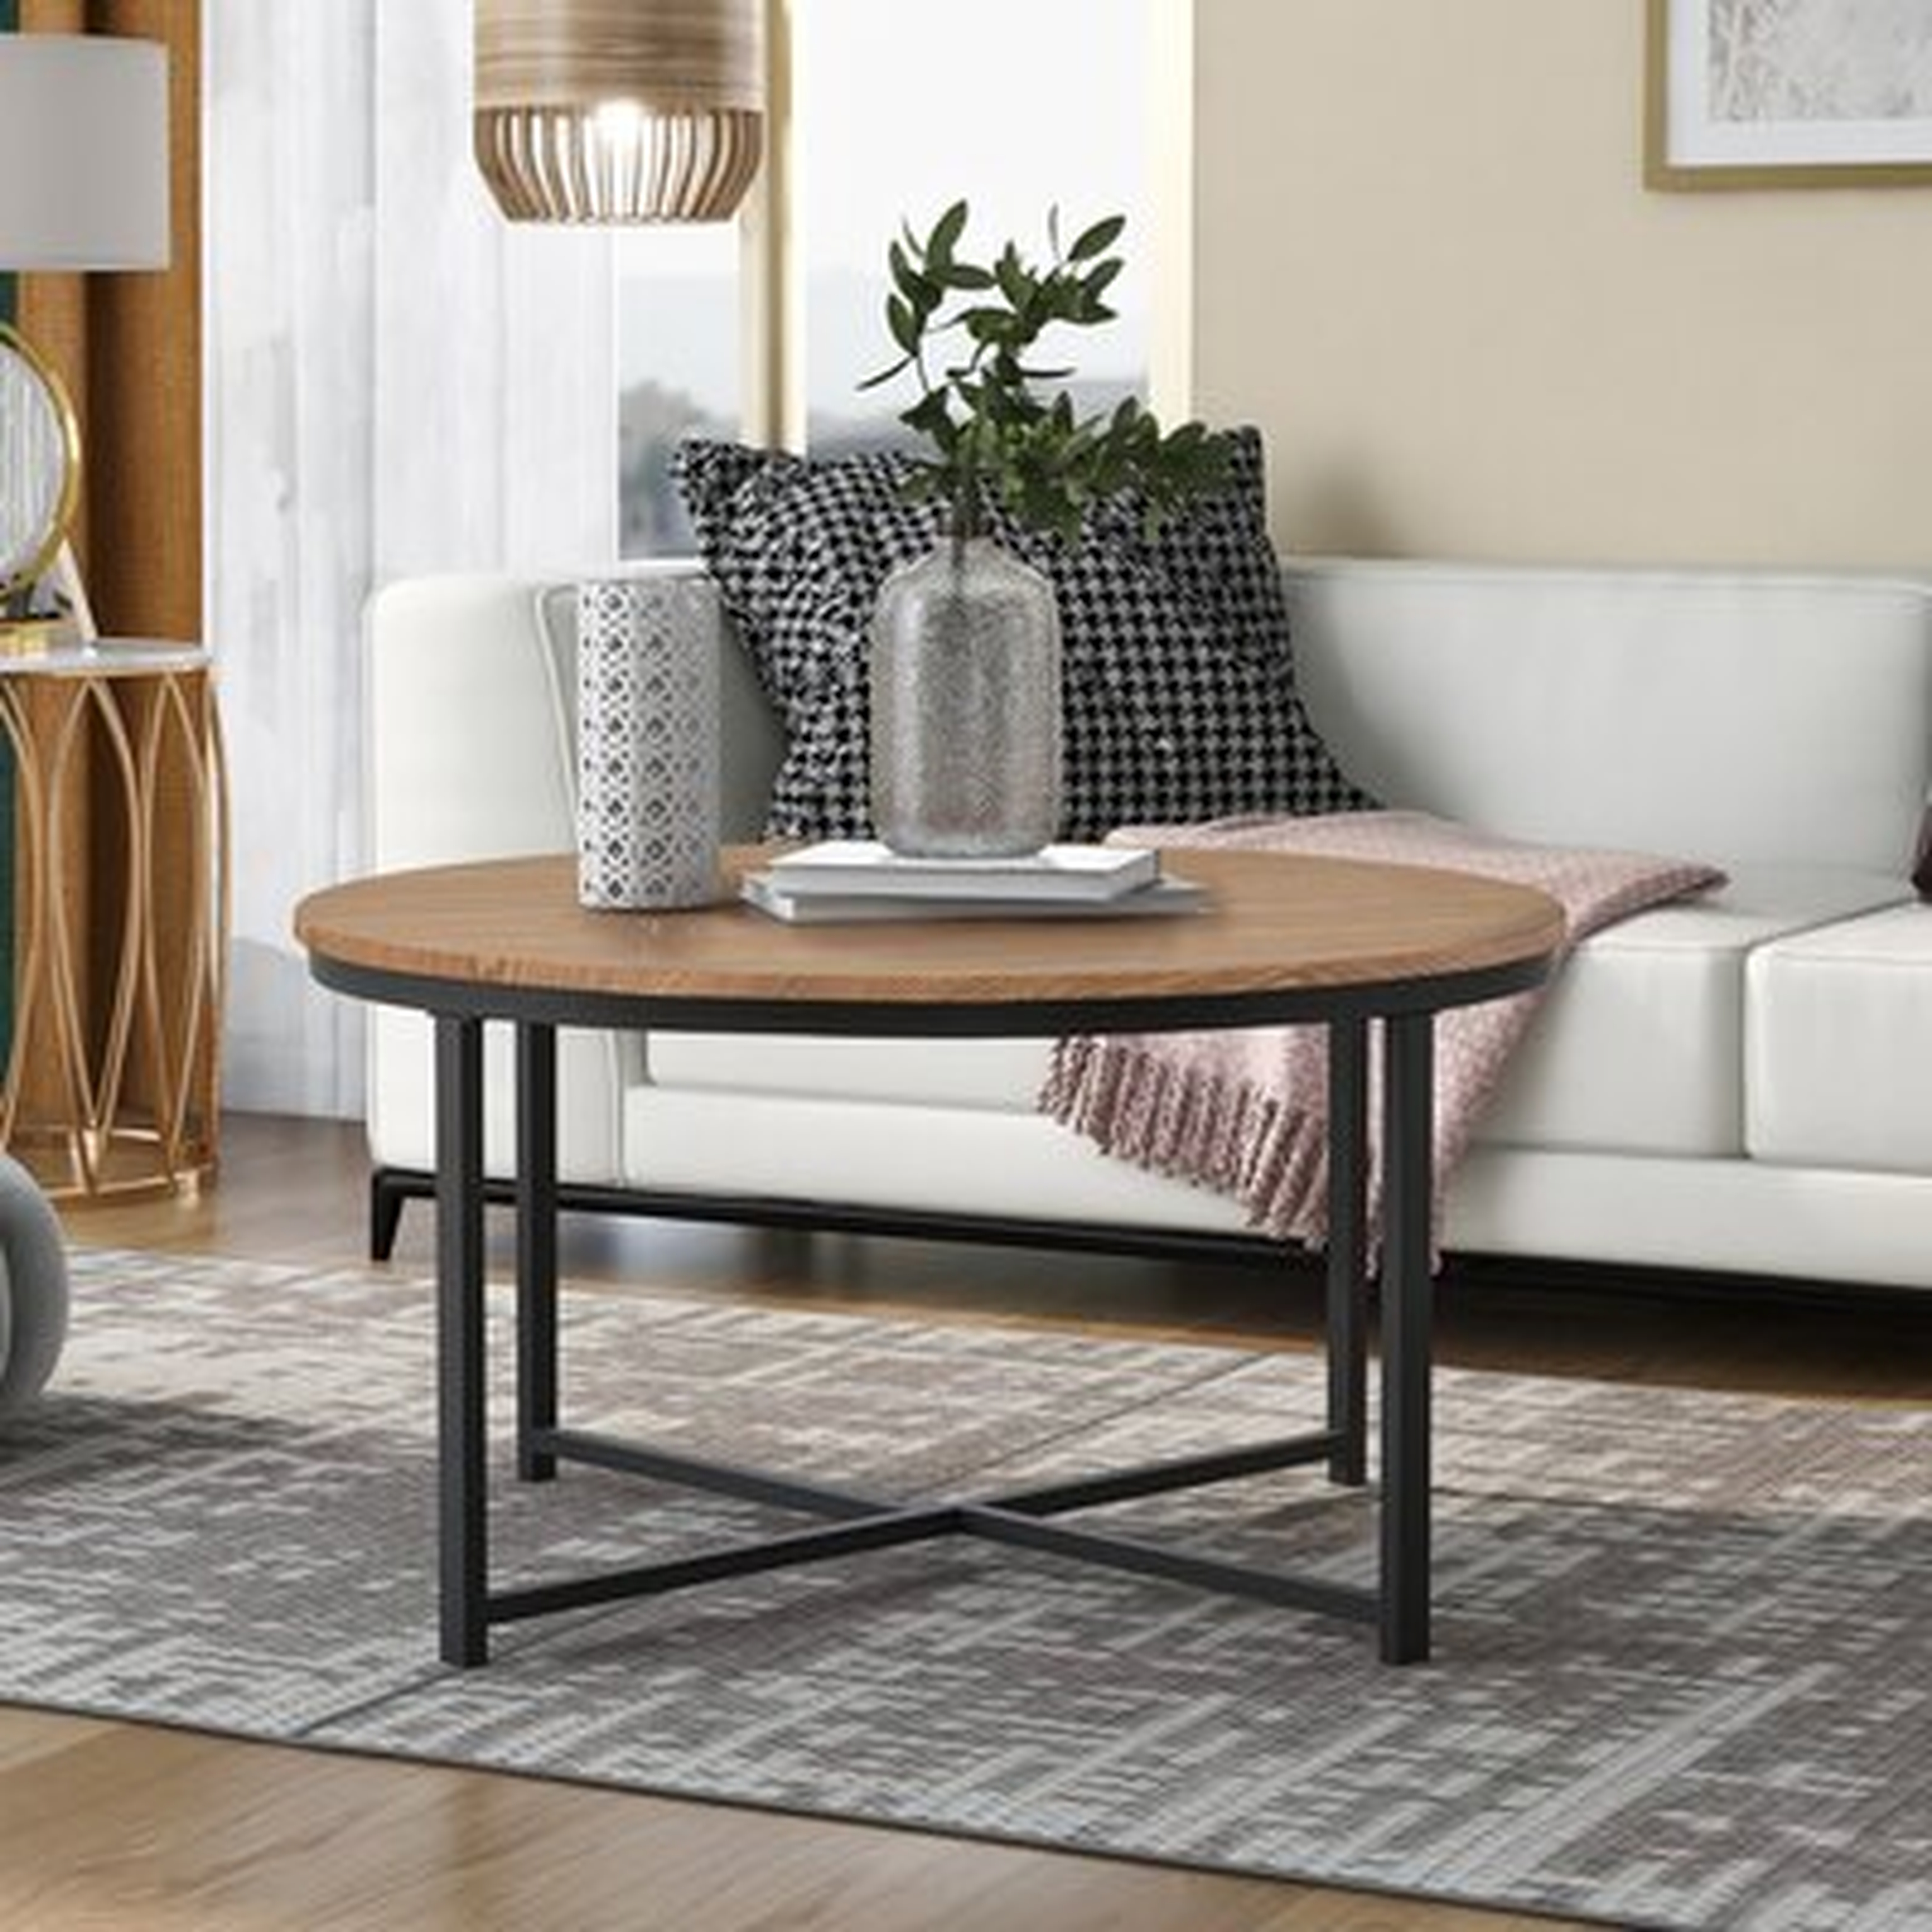 Rustic Design Round Coffee Table Featuring X-Shaped Base And Adjustable Leg - Wayfair